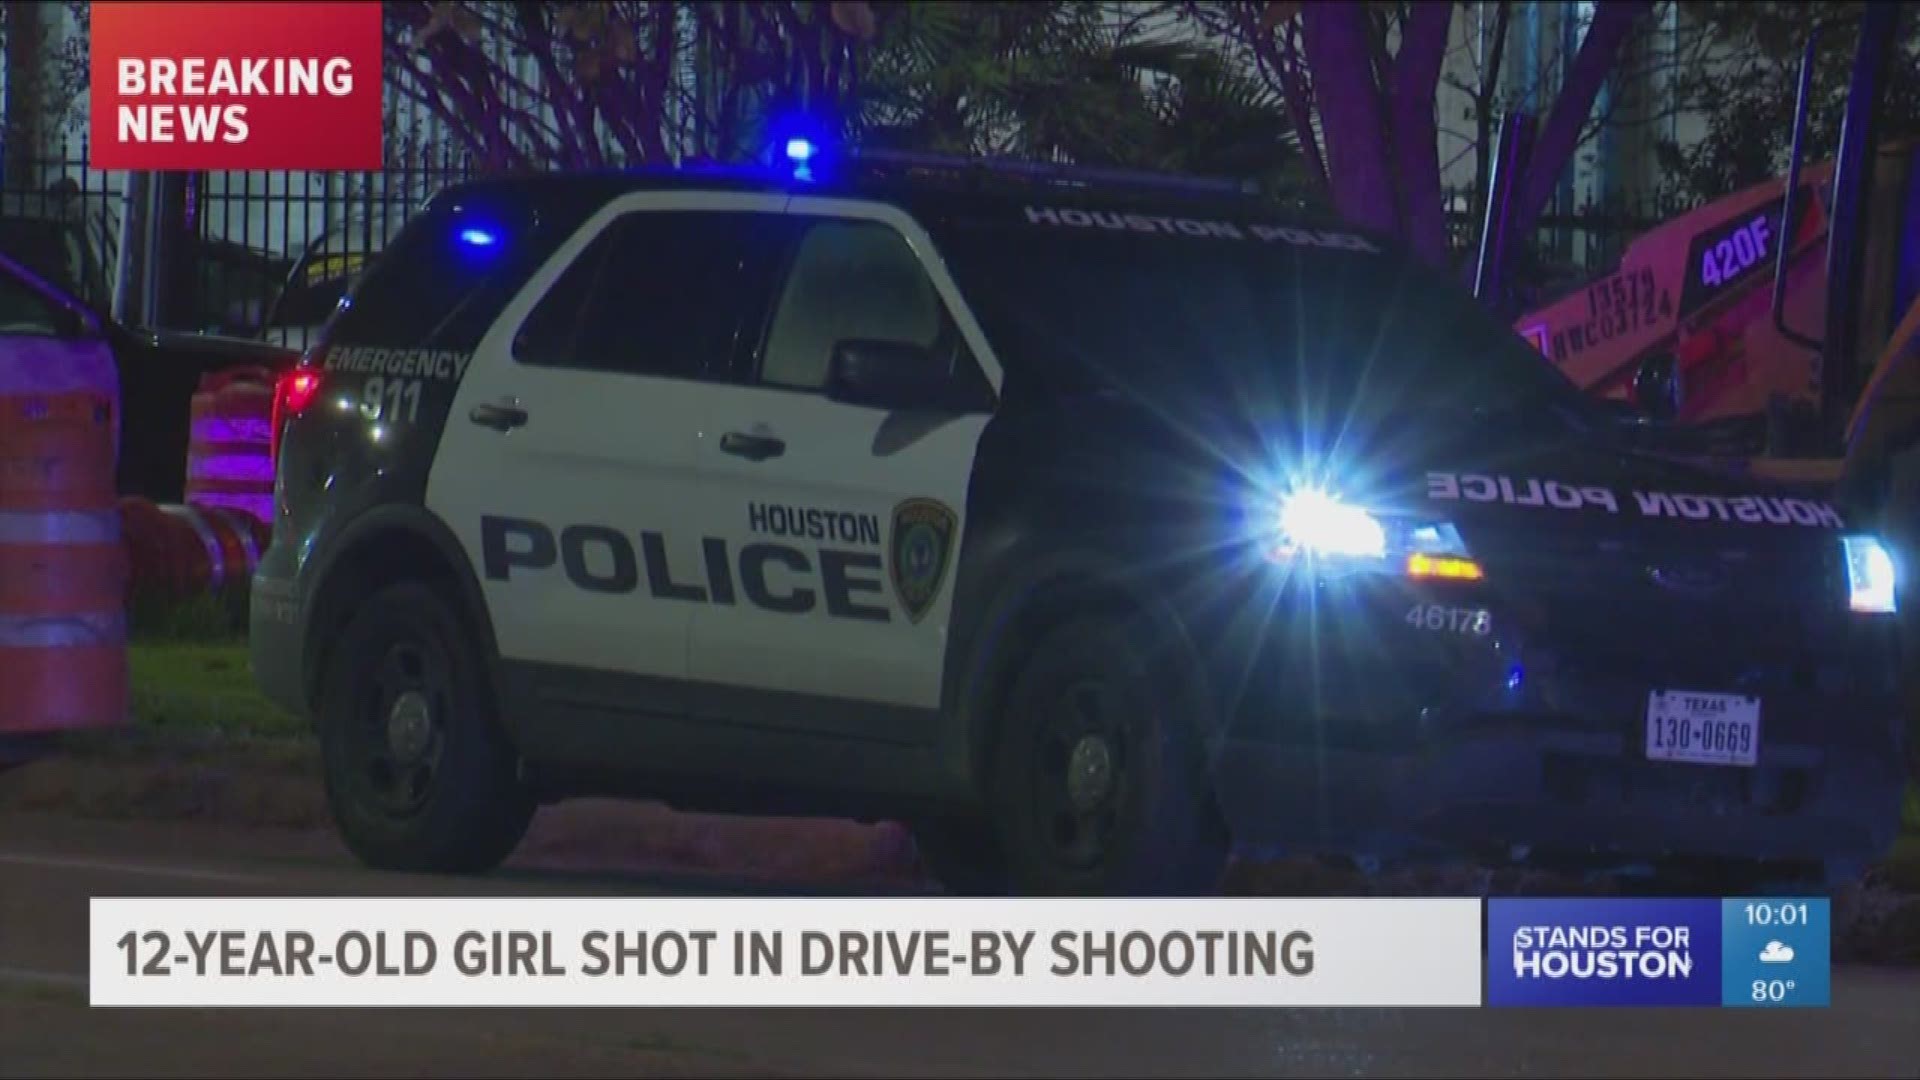 Police are investigating a drive-by shooting in northwest Houston that left a 12-year-old girl wounded Friday evening.